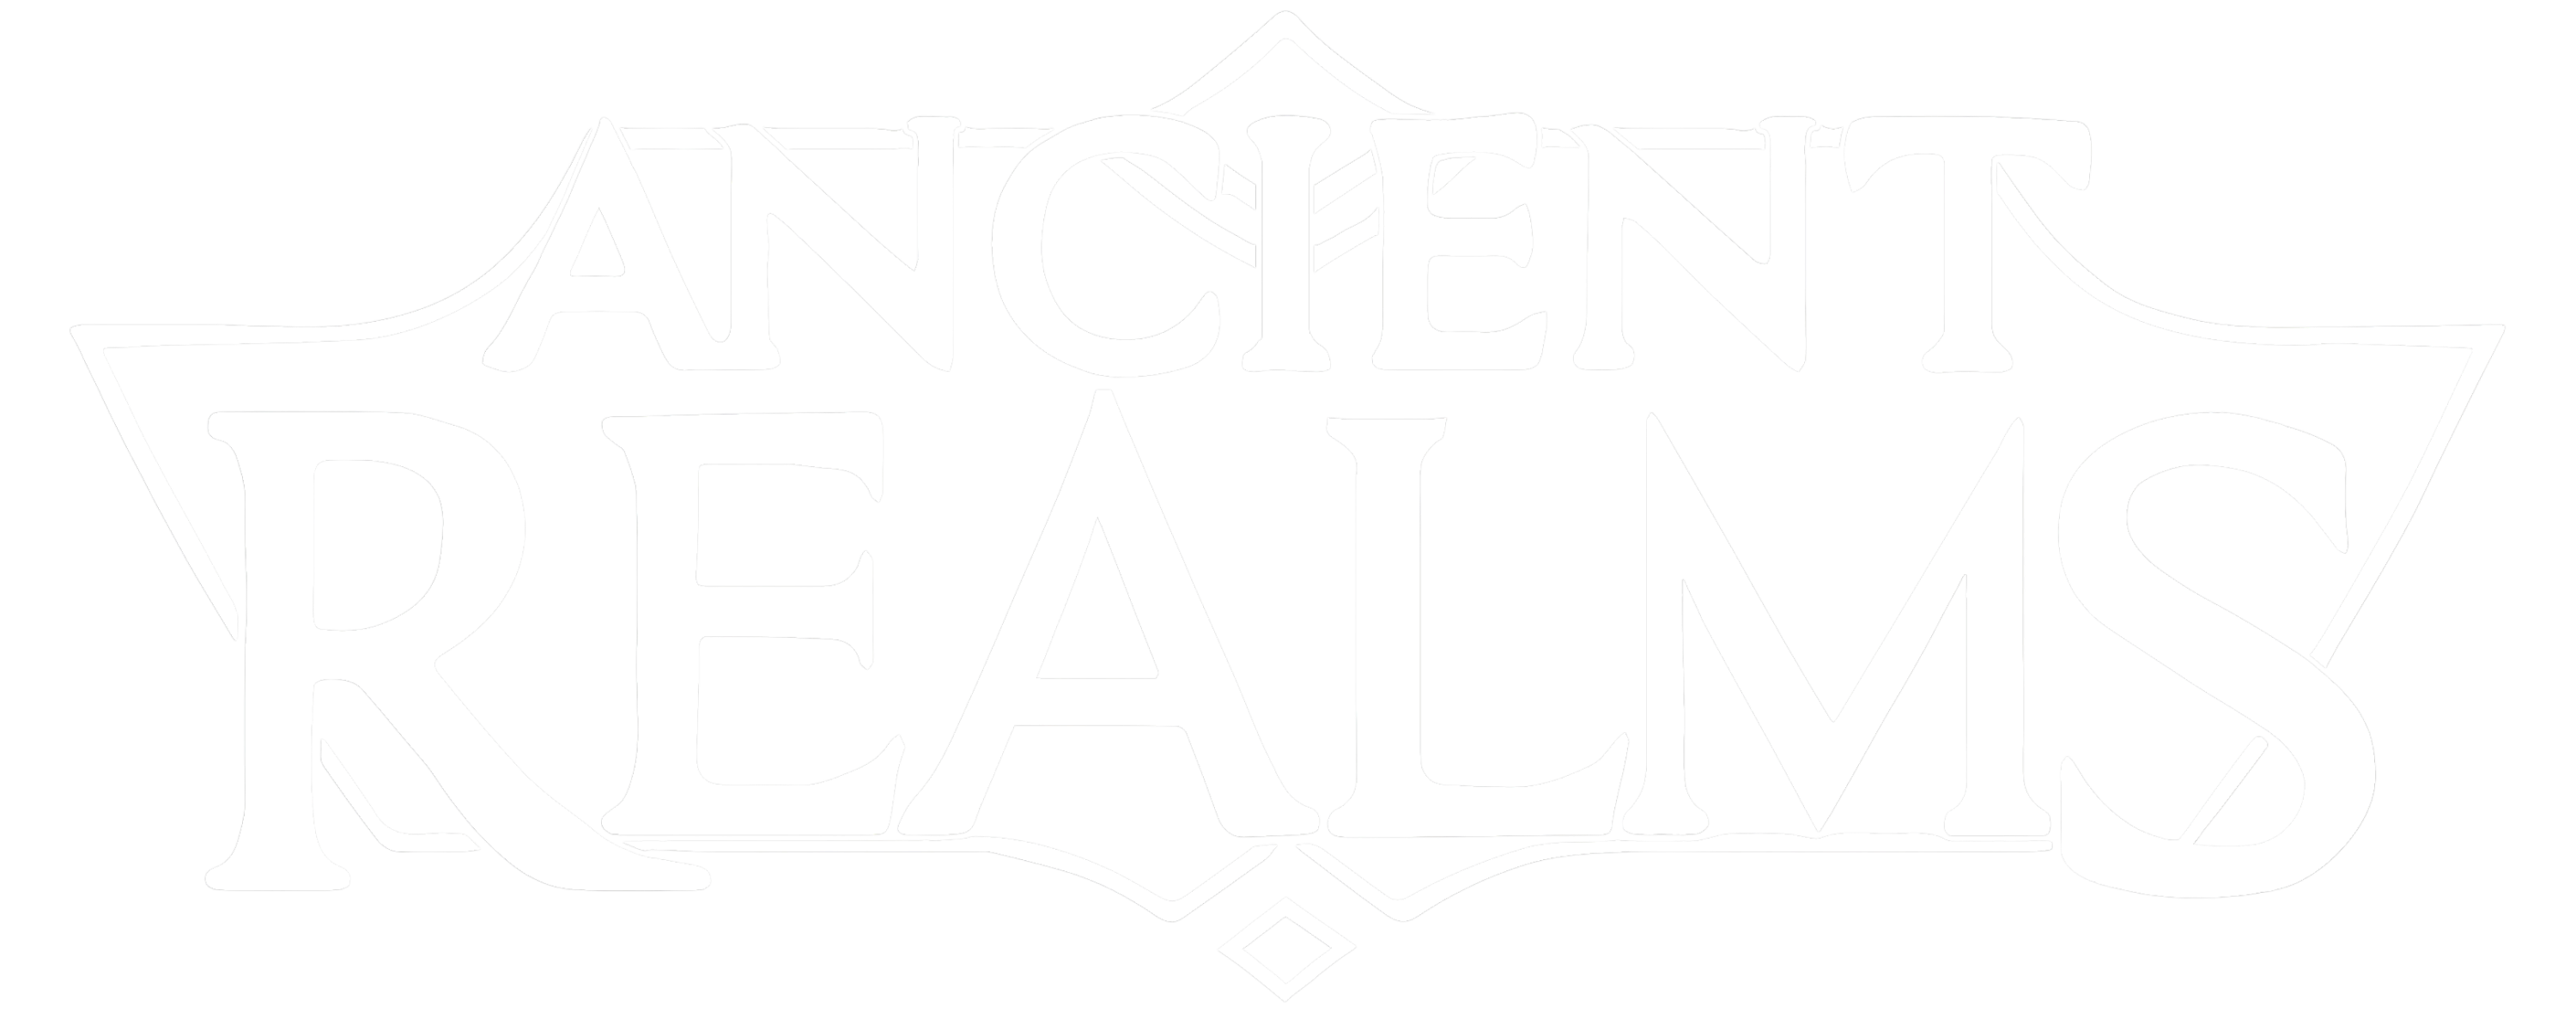 Ancient Realms